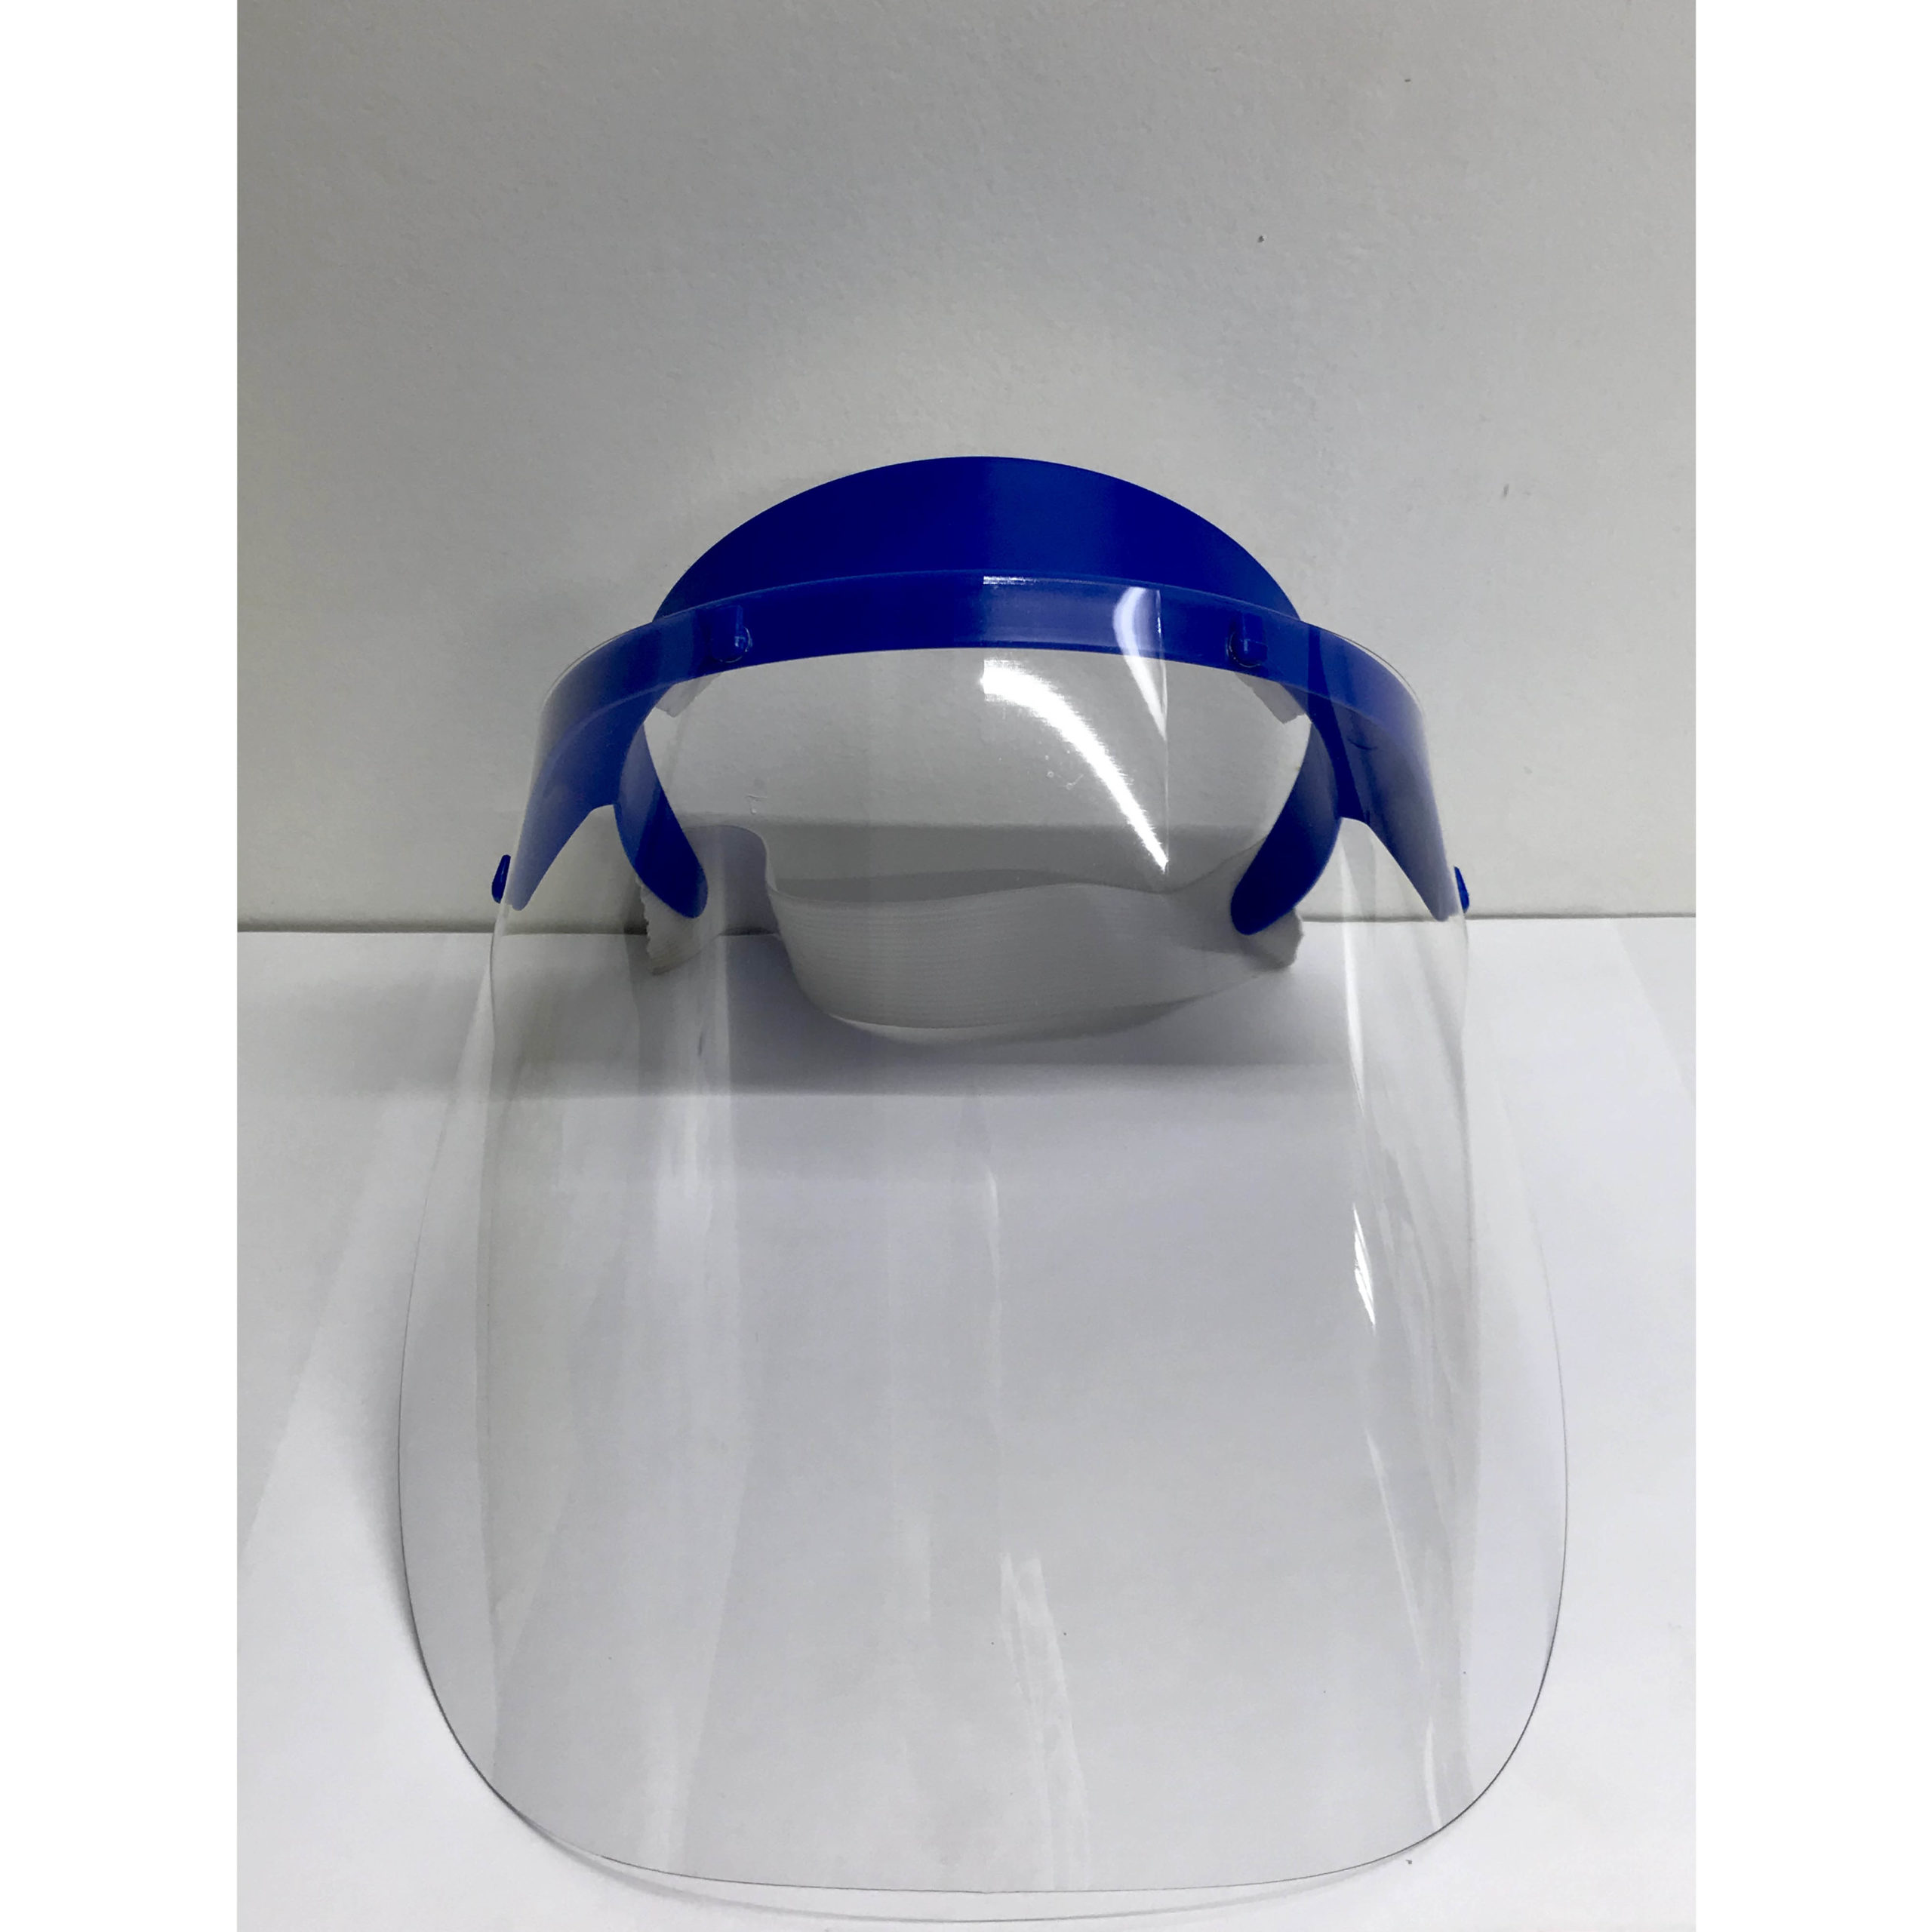 Face Shields Covid 19 Ppe Bo Mer Plastics Made In The Usa